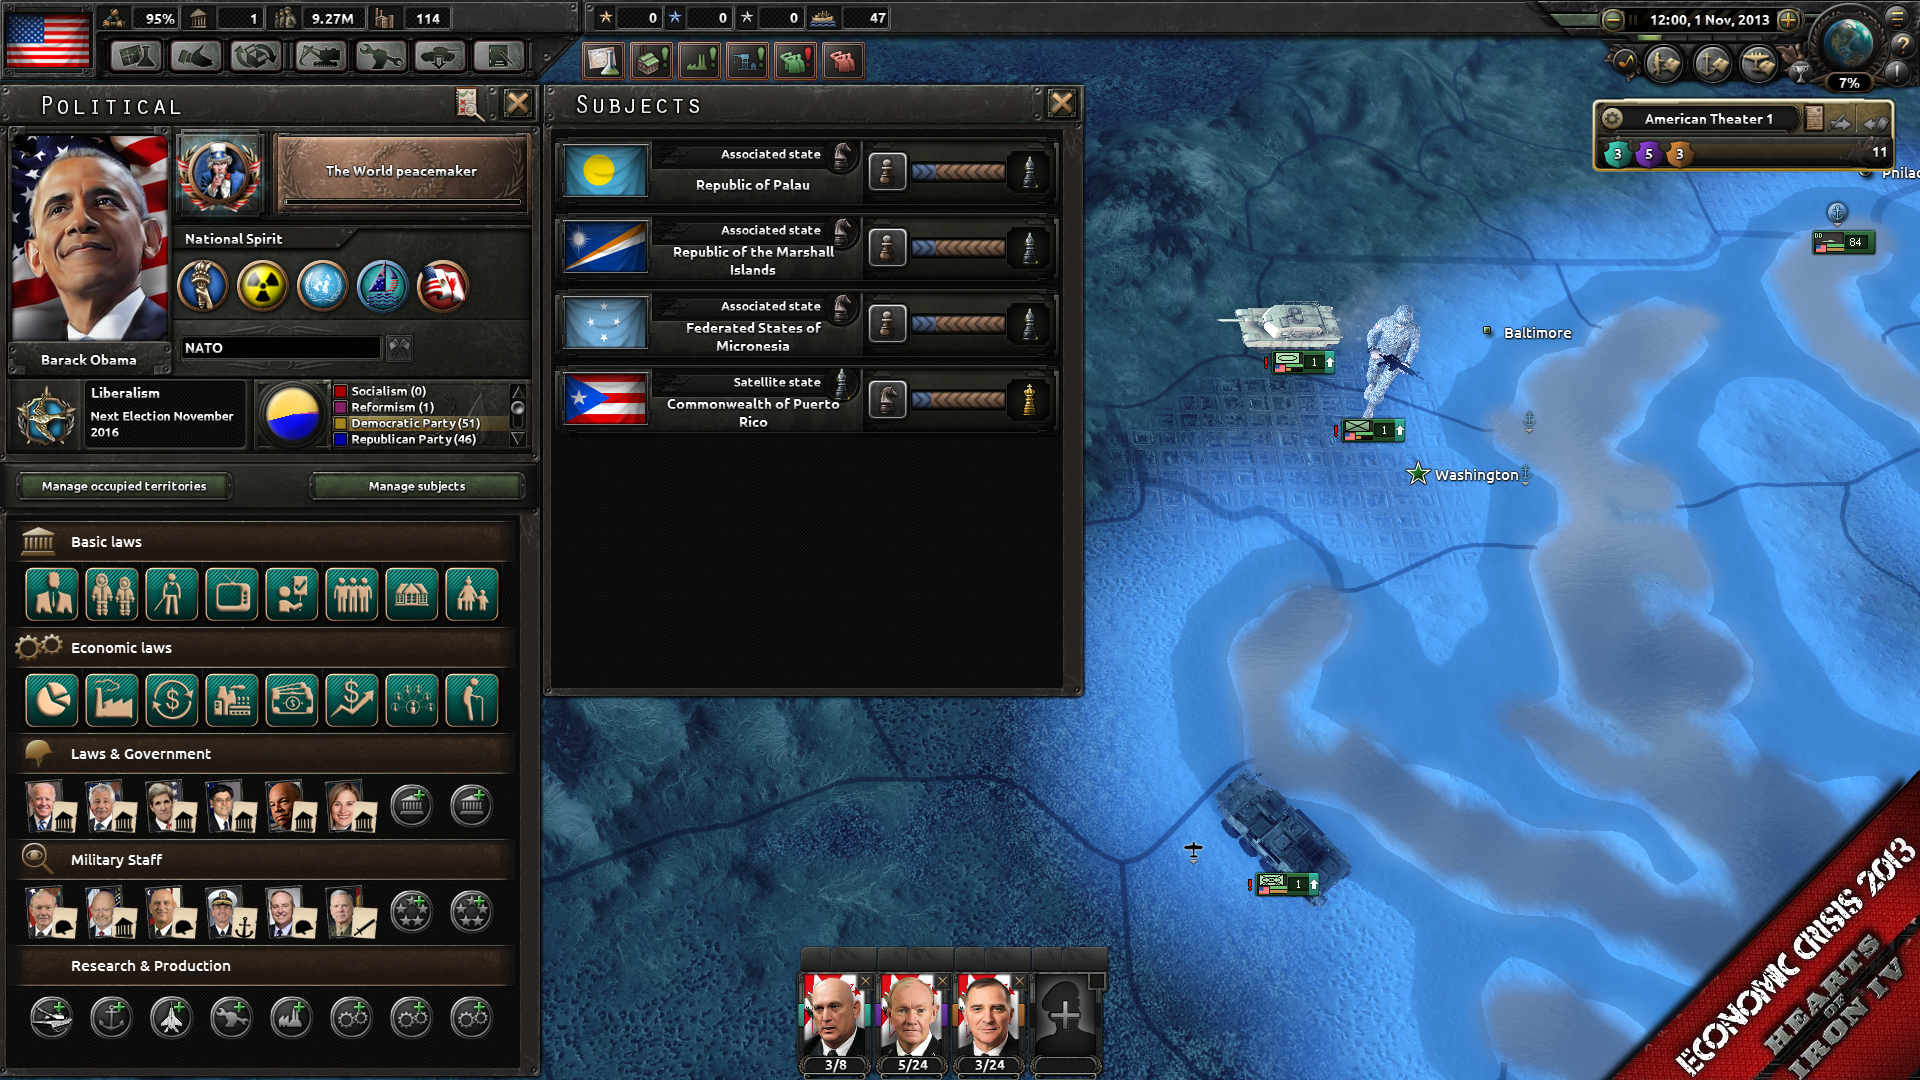 hearts of iron 4 countries